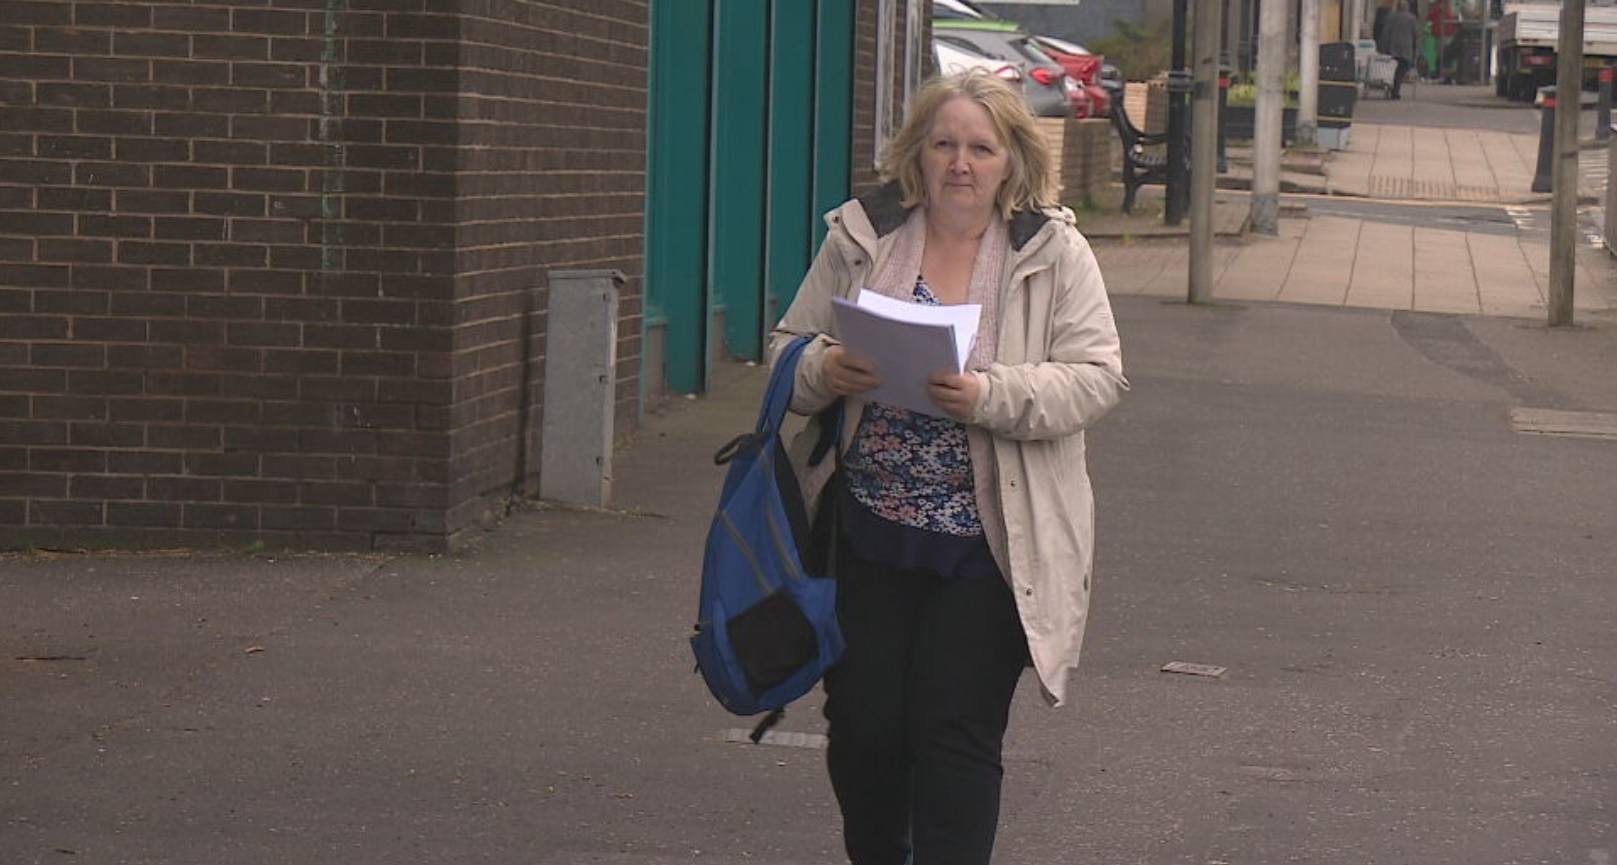 Joyce Cameron launched a petition to save Broxburn Swimming Council from closure